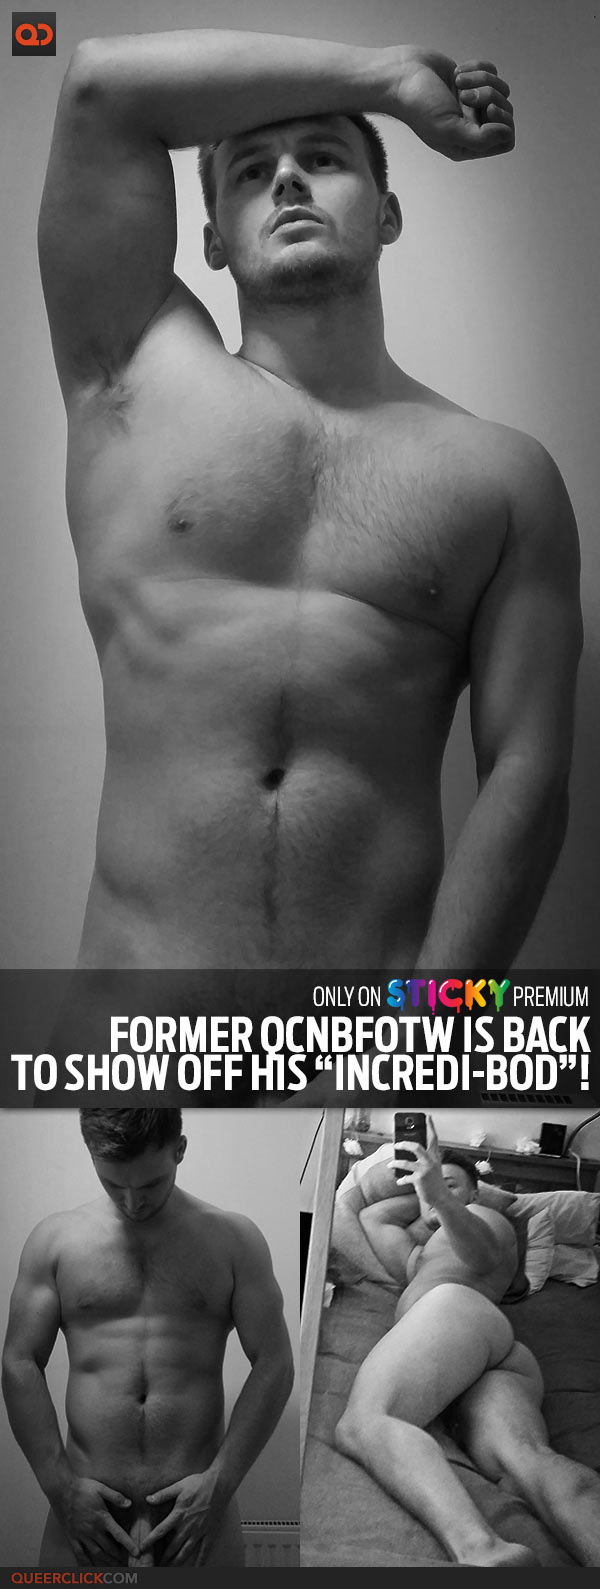 Former QCNBFOTW Is Back To Show Off Is “Incredi-Bod” Only On Sticky Premium